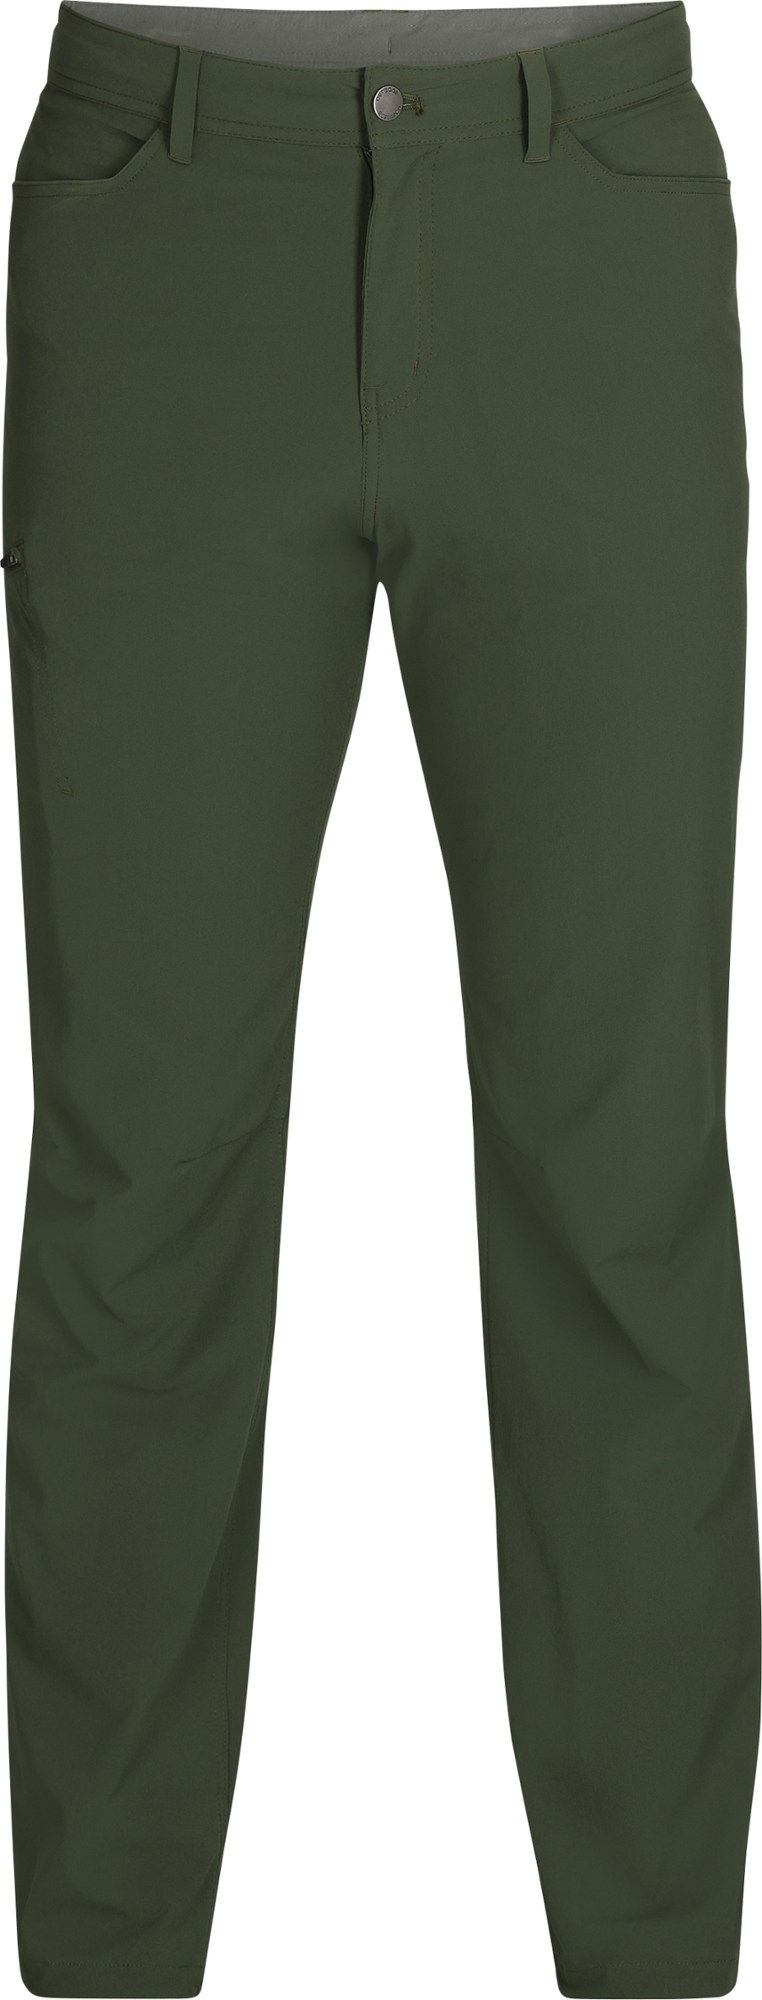 Outdoor Research Ferrosi hiking pants_0